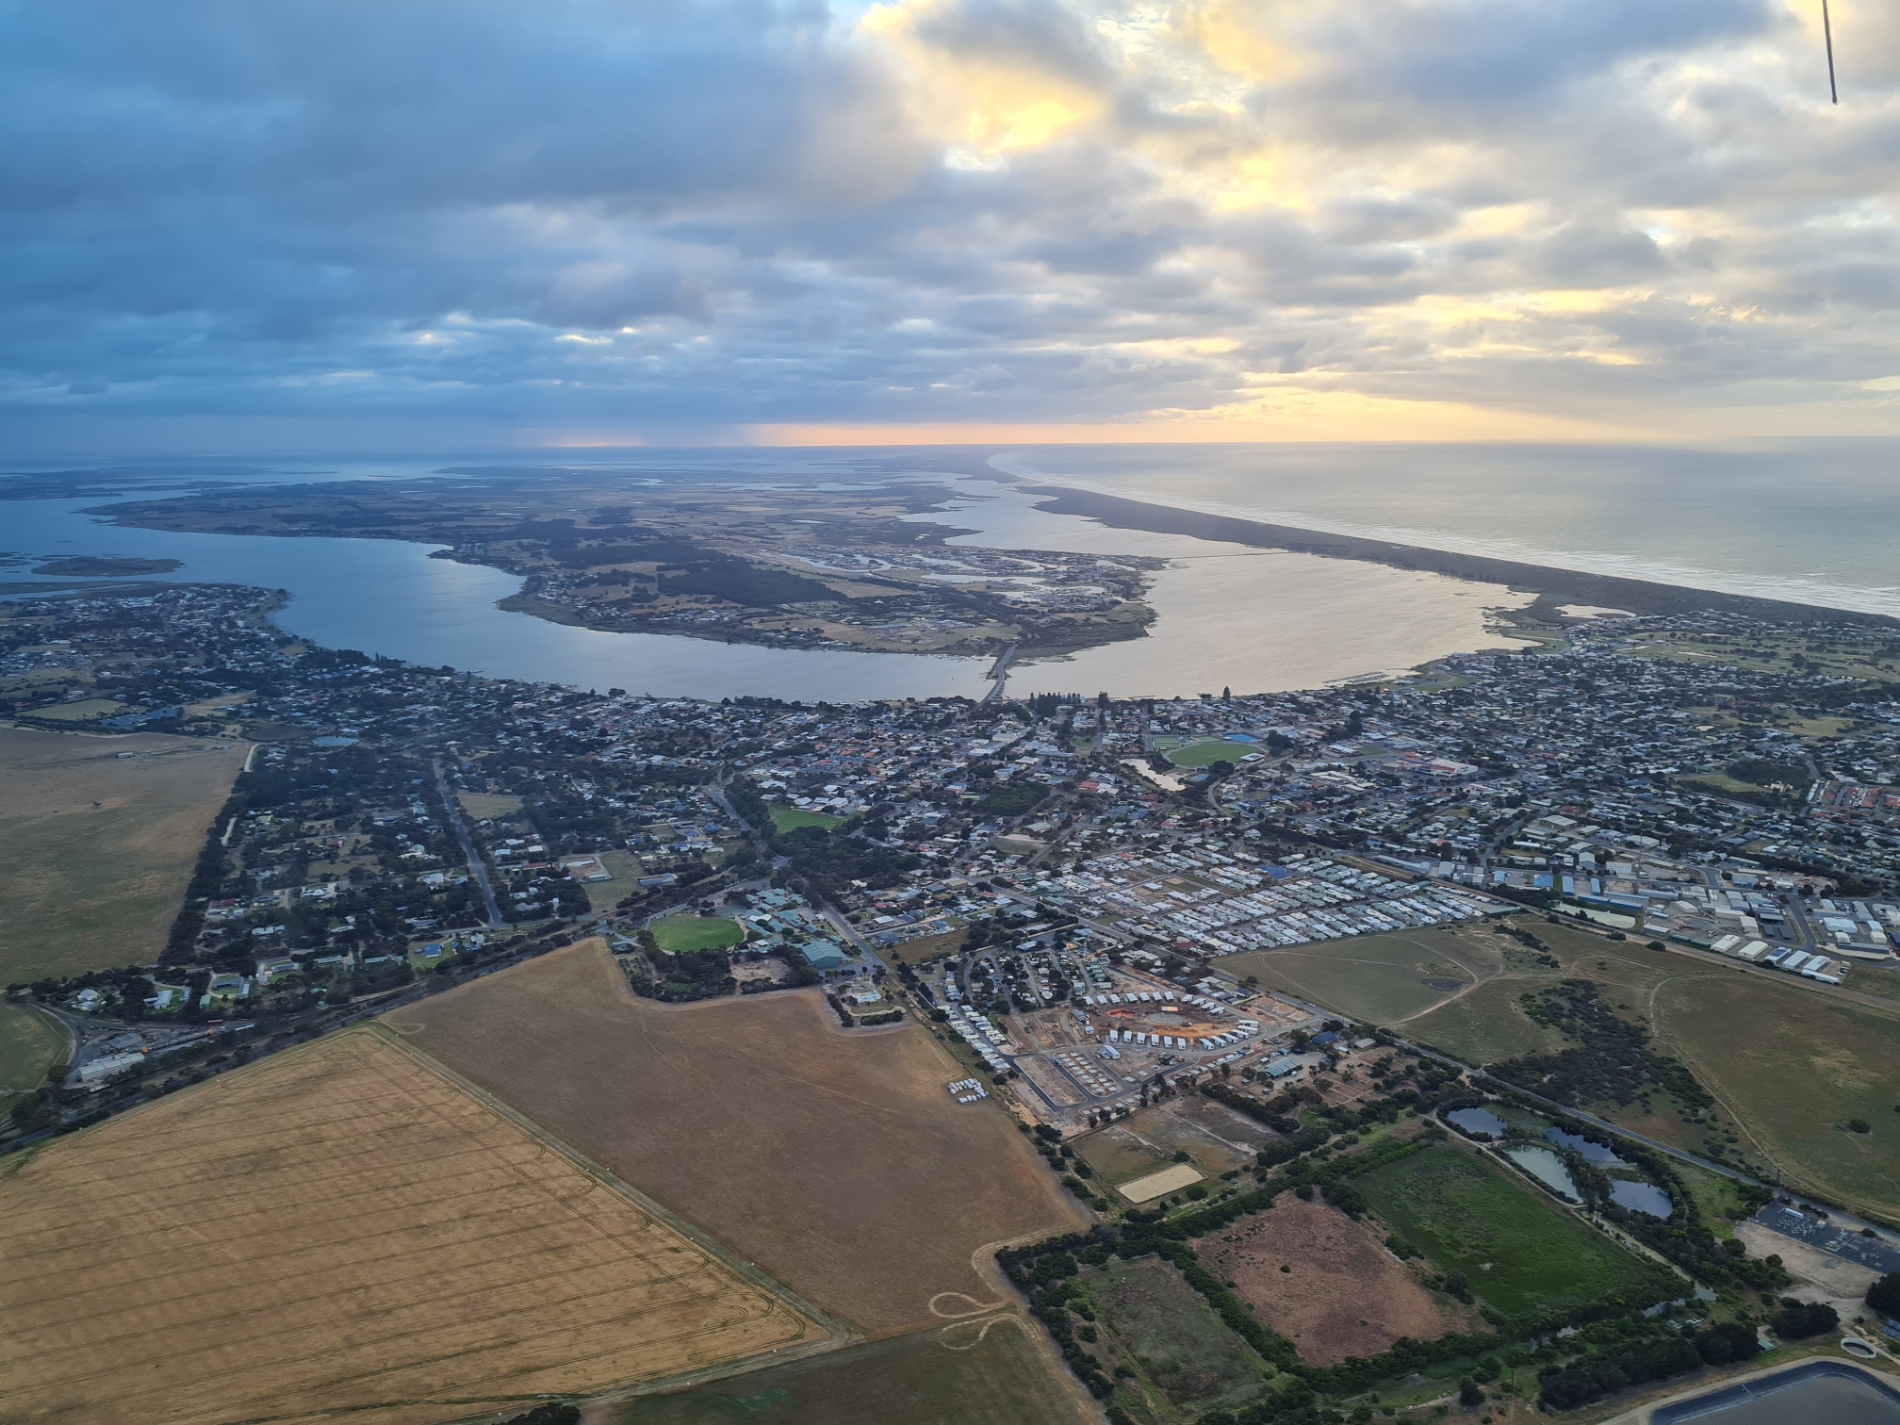 Early morning take-off from Goolwa.